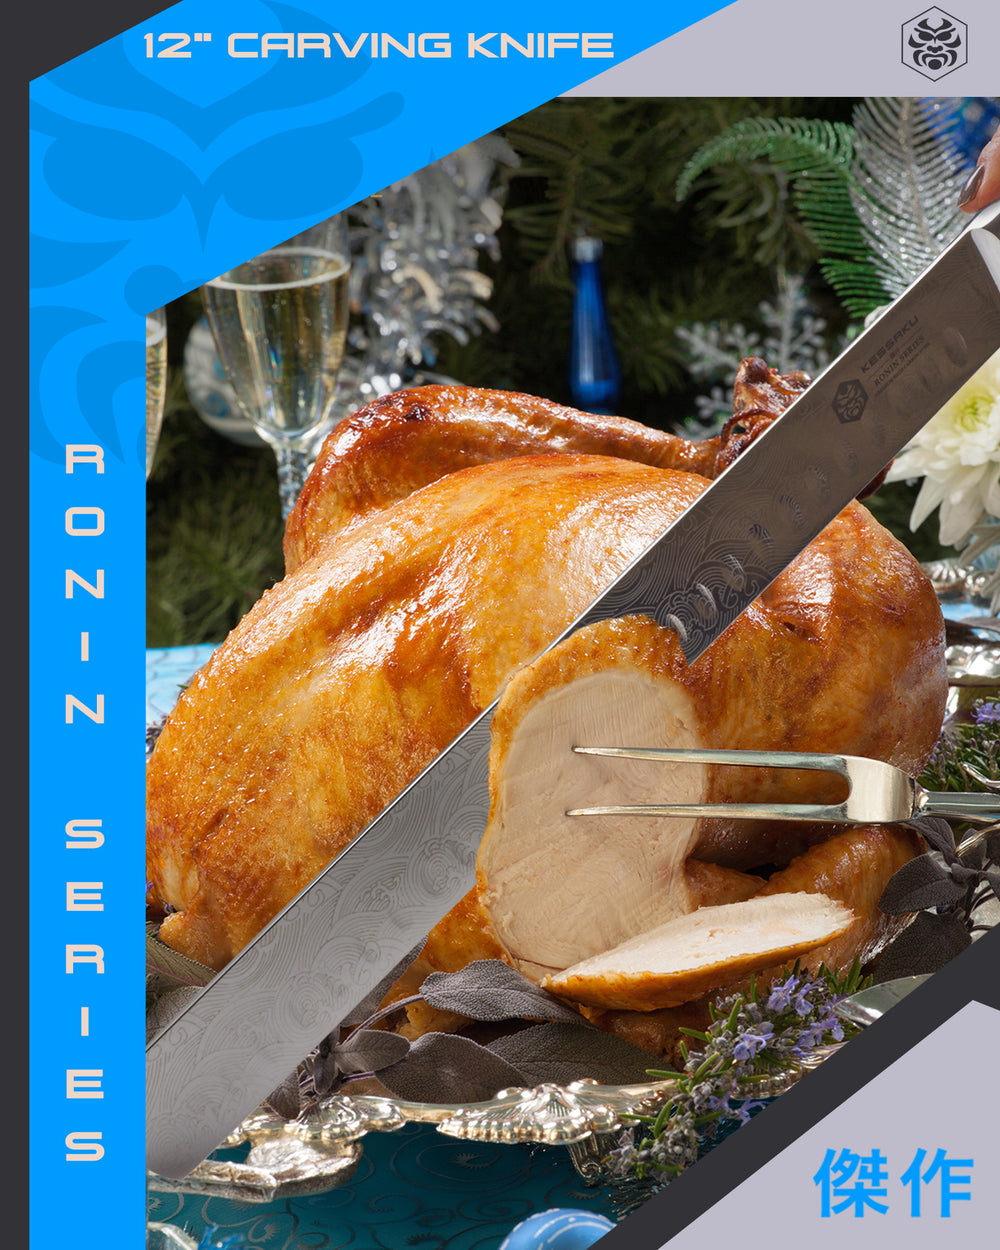 A woman carves a turkey using the 12" carving knife